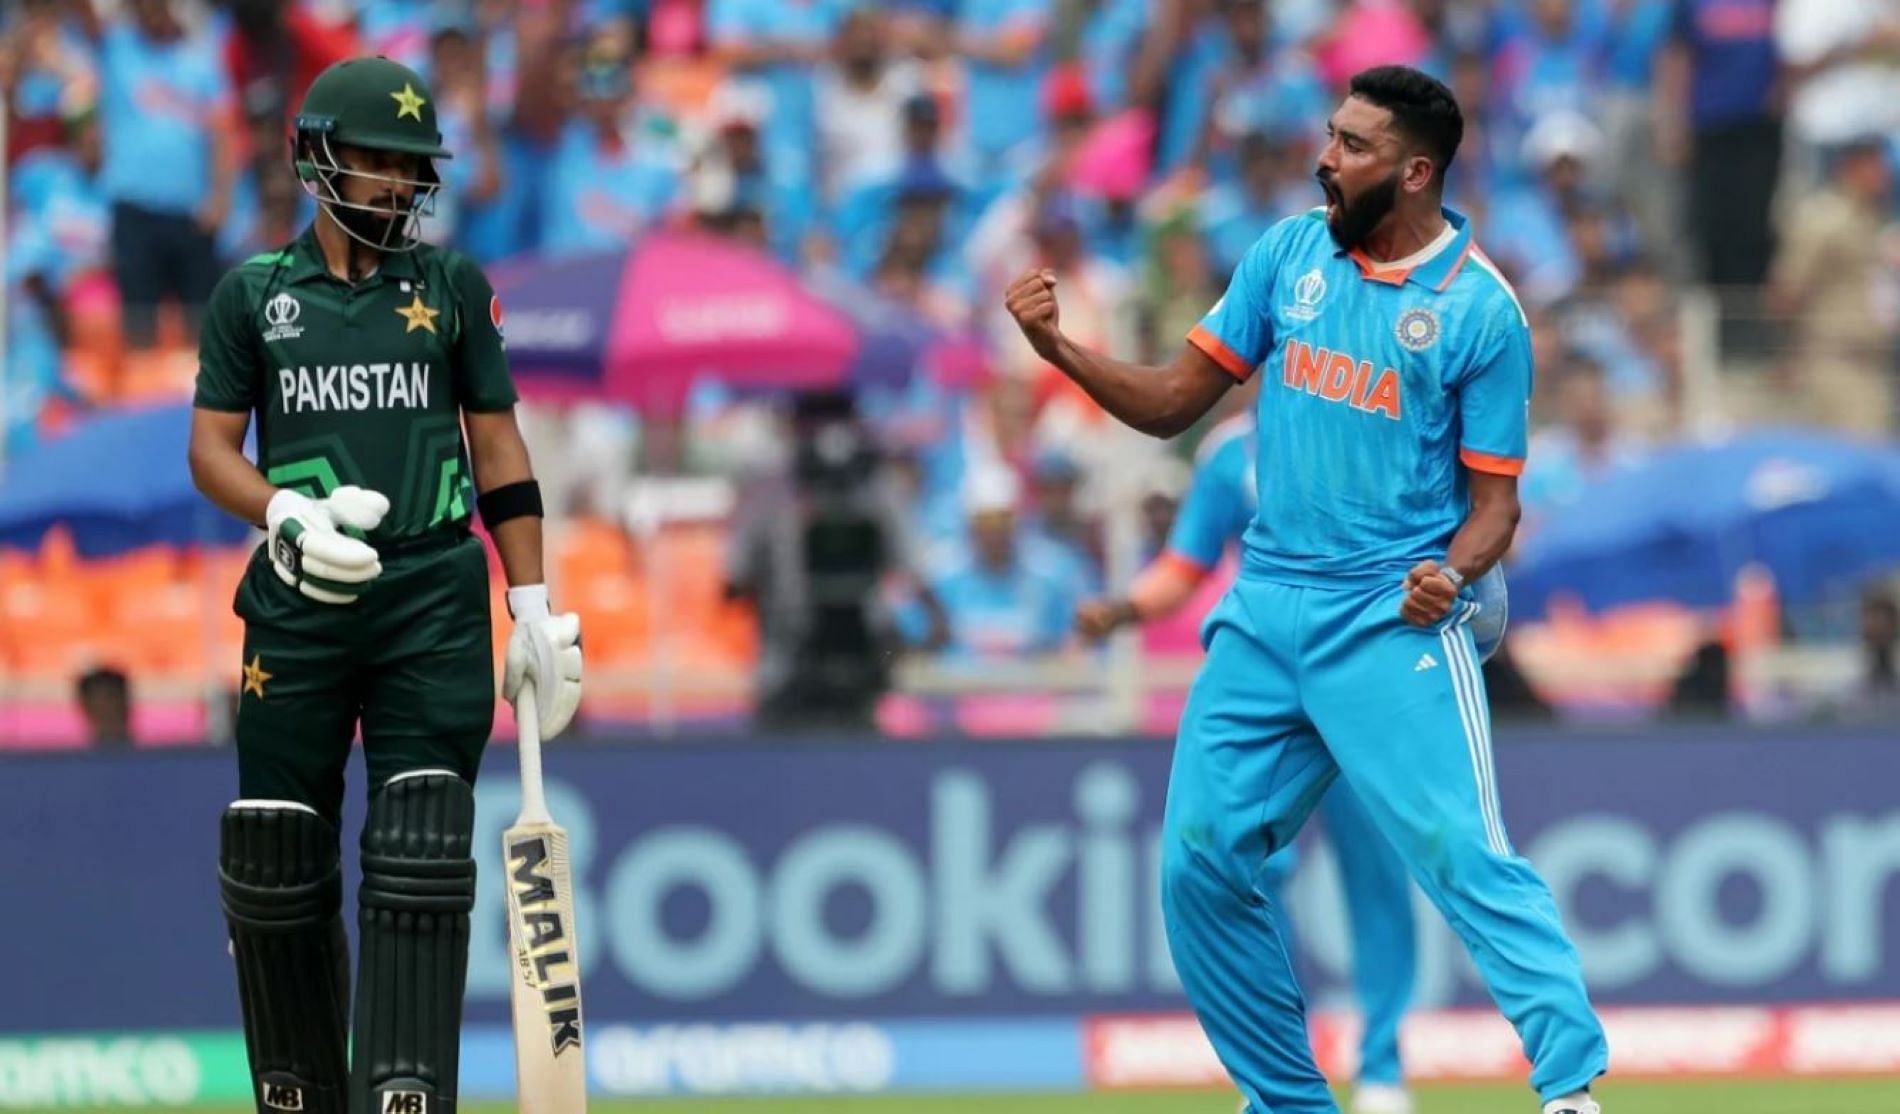 Siraj repaid the faith shown by Rohit Sharma with two crucial wickets.